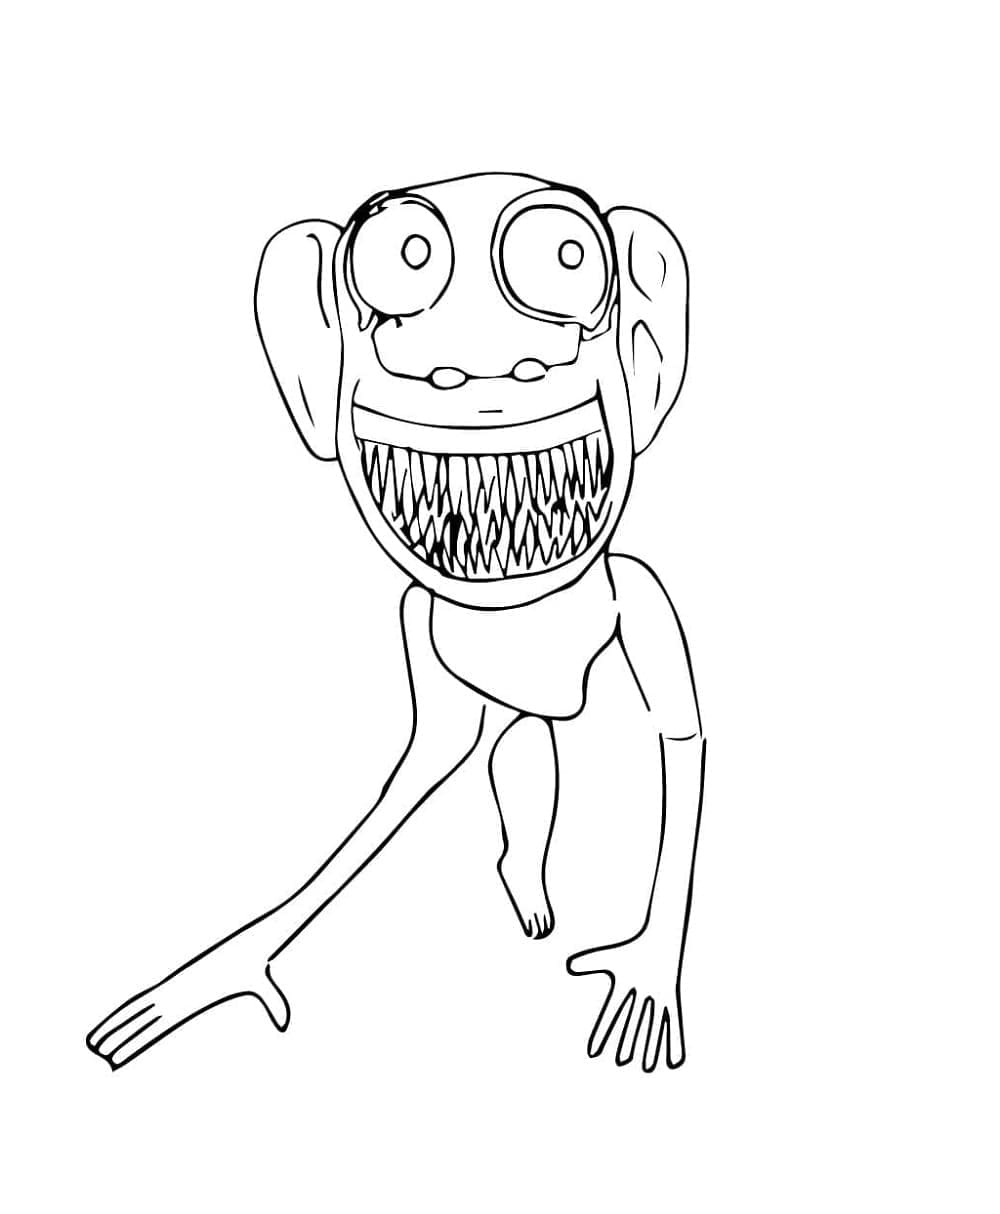 Printable Monster Monkey from Zoonomaly Coloring Page